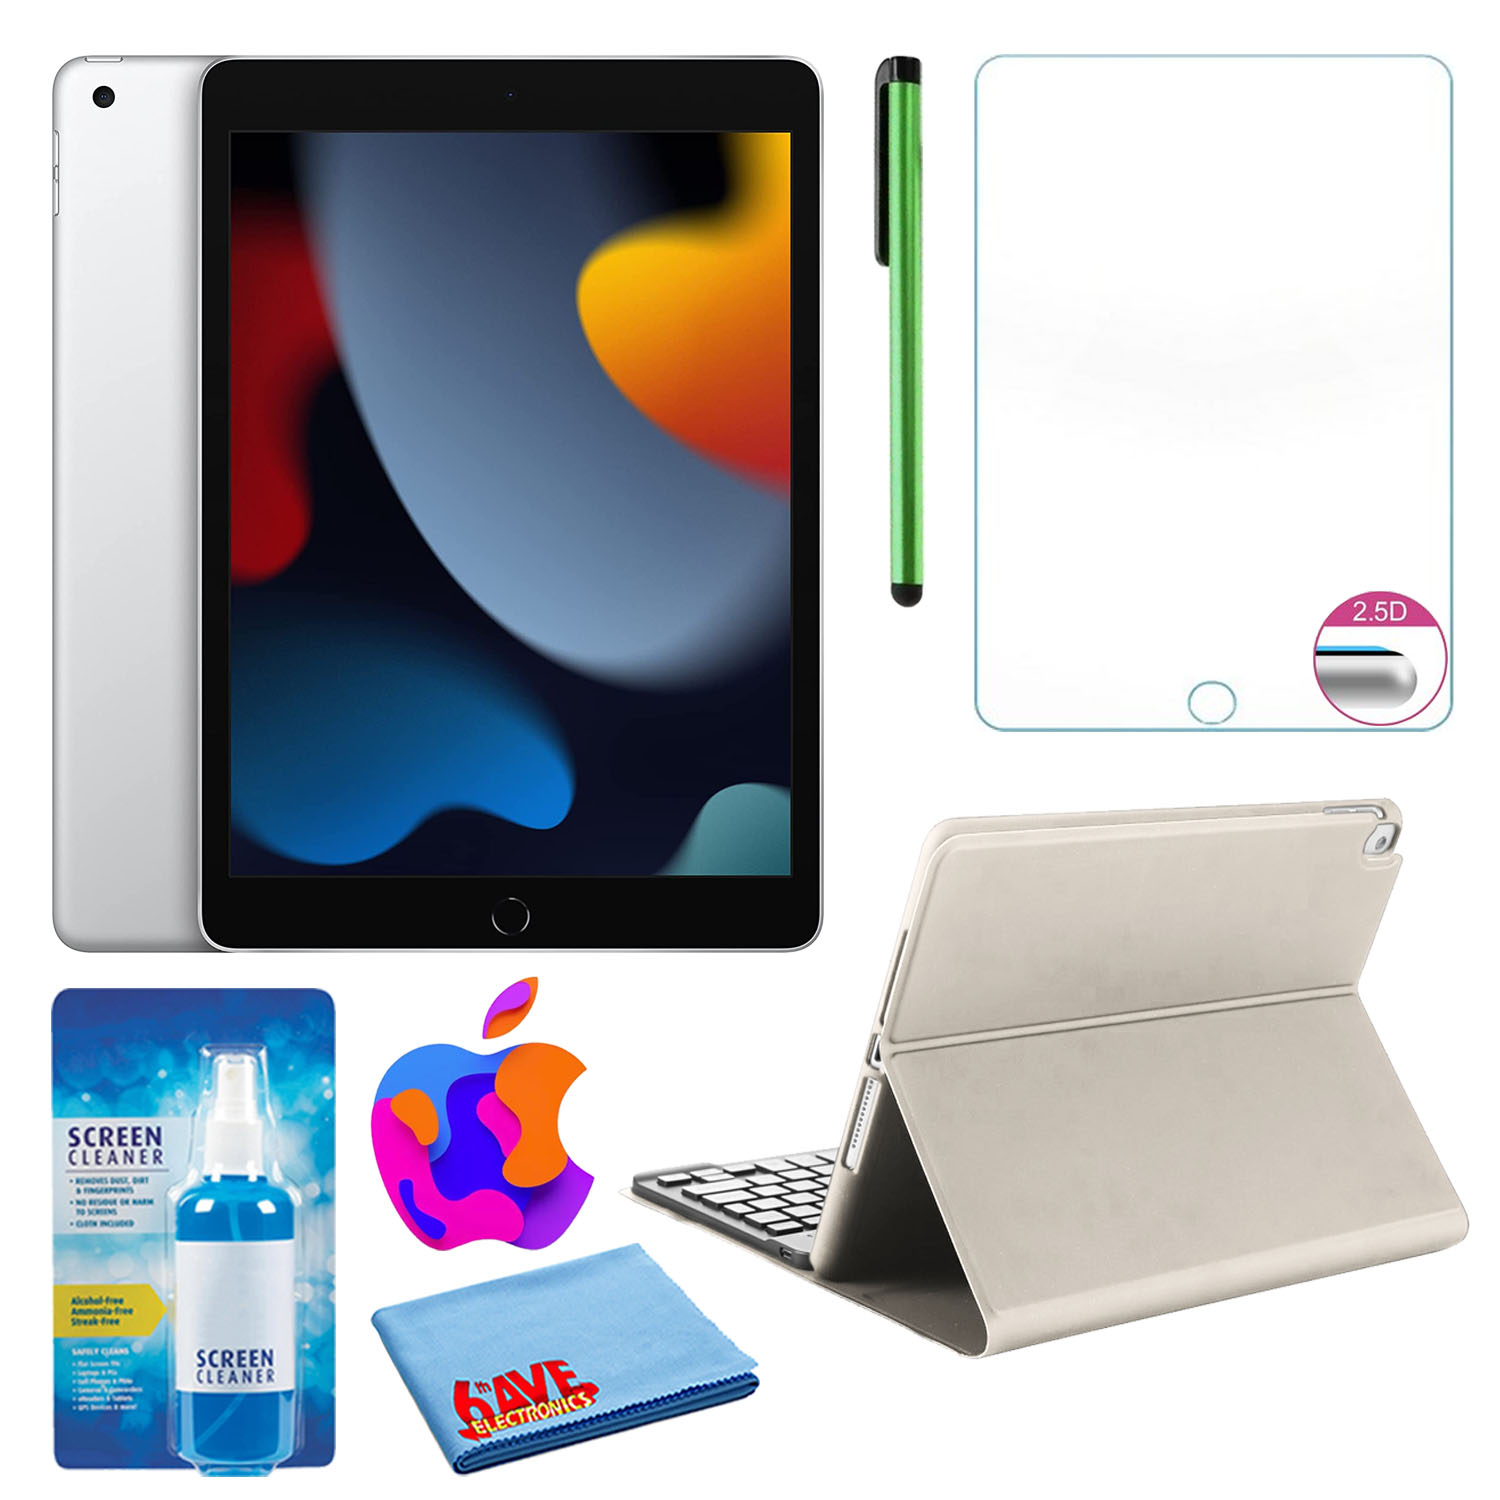 Apple 10.2" iPad (2021, 64GB, Wi-Fi, Silver) (MK2L3LL/A) Bundle with White Keyboard Case & Screen Protector - image 1 of 8